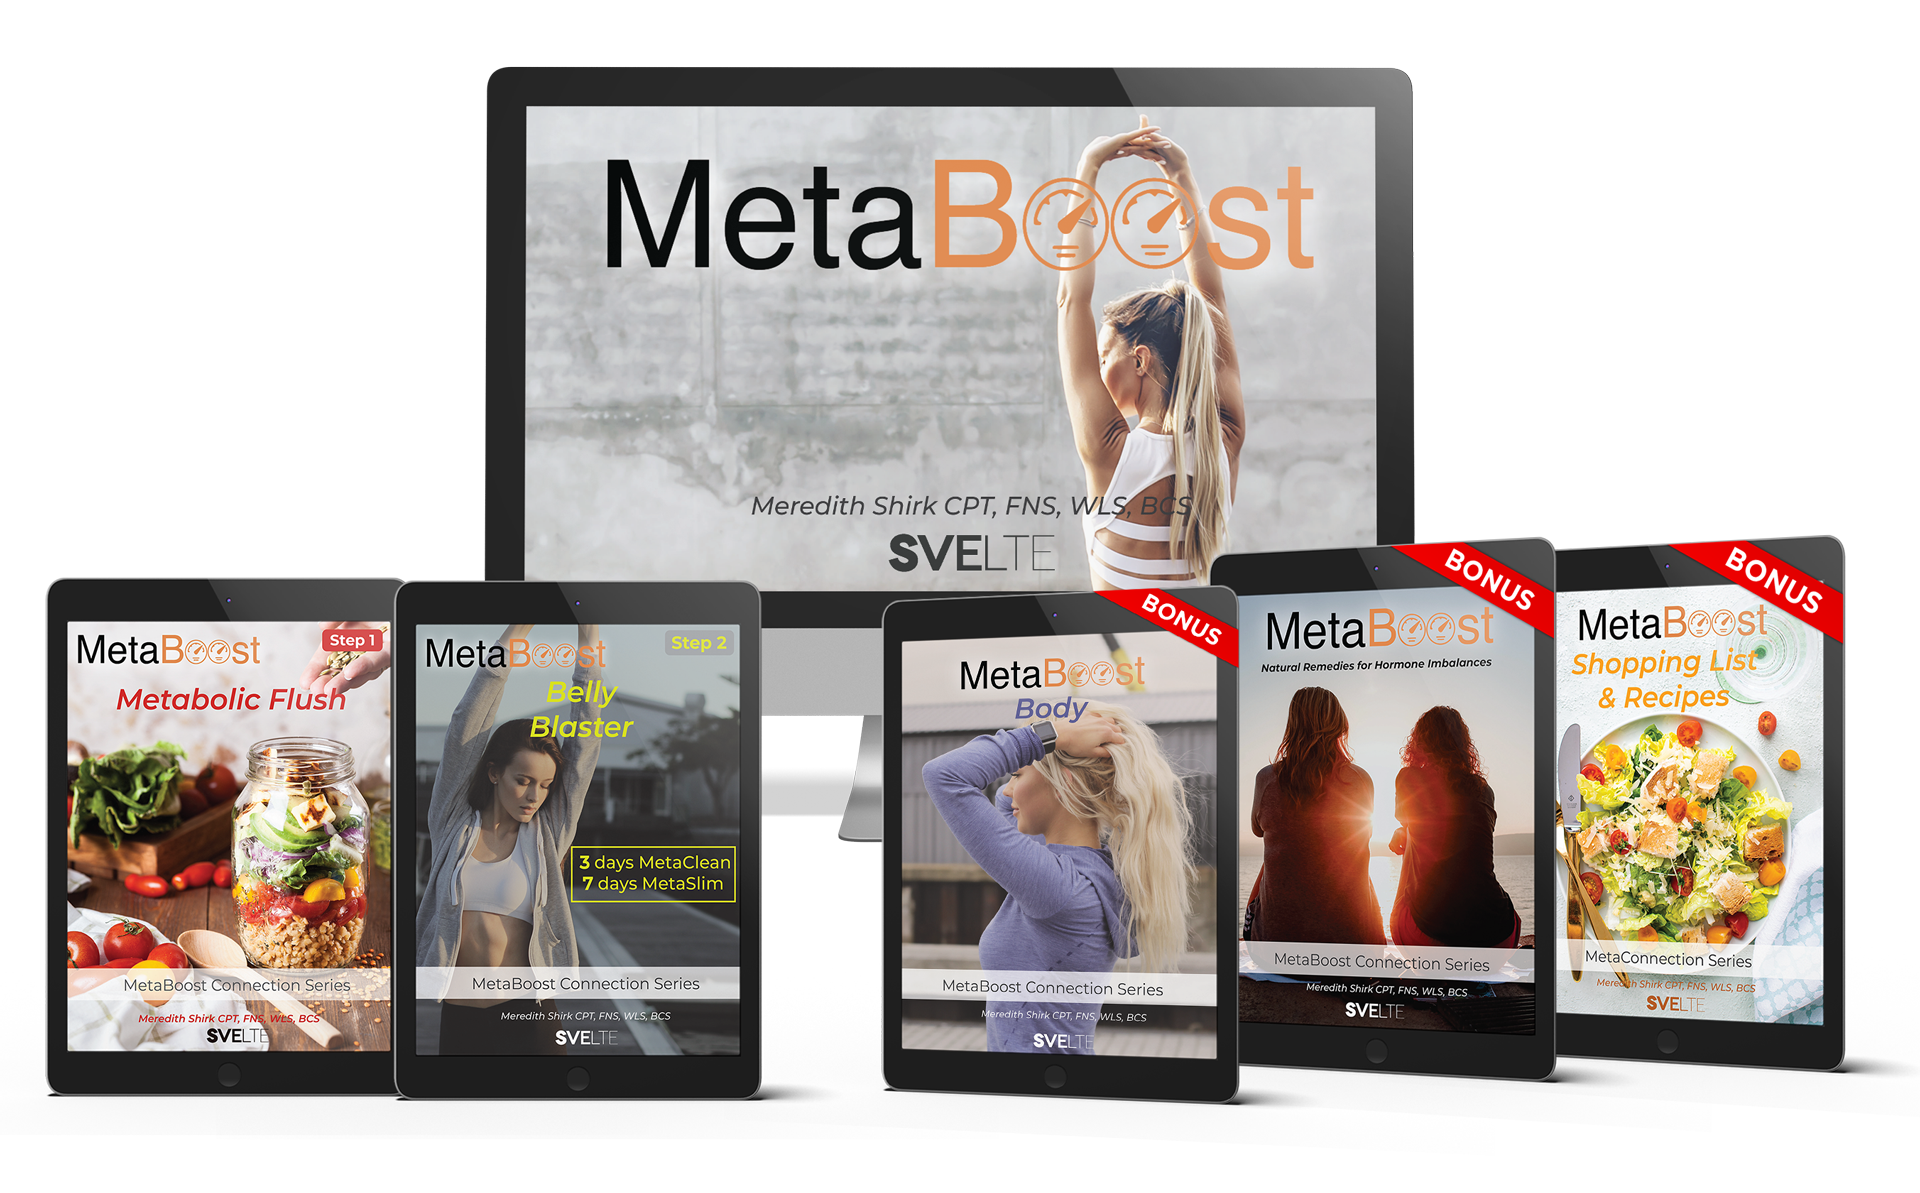 metaboost-connection-svelte-training-members